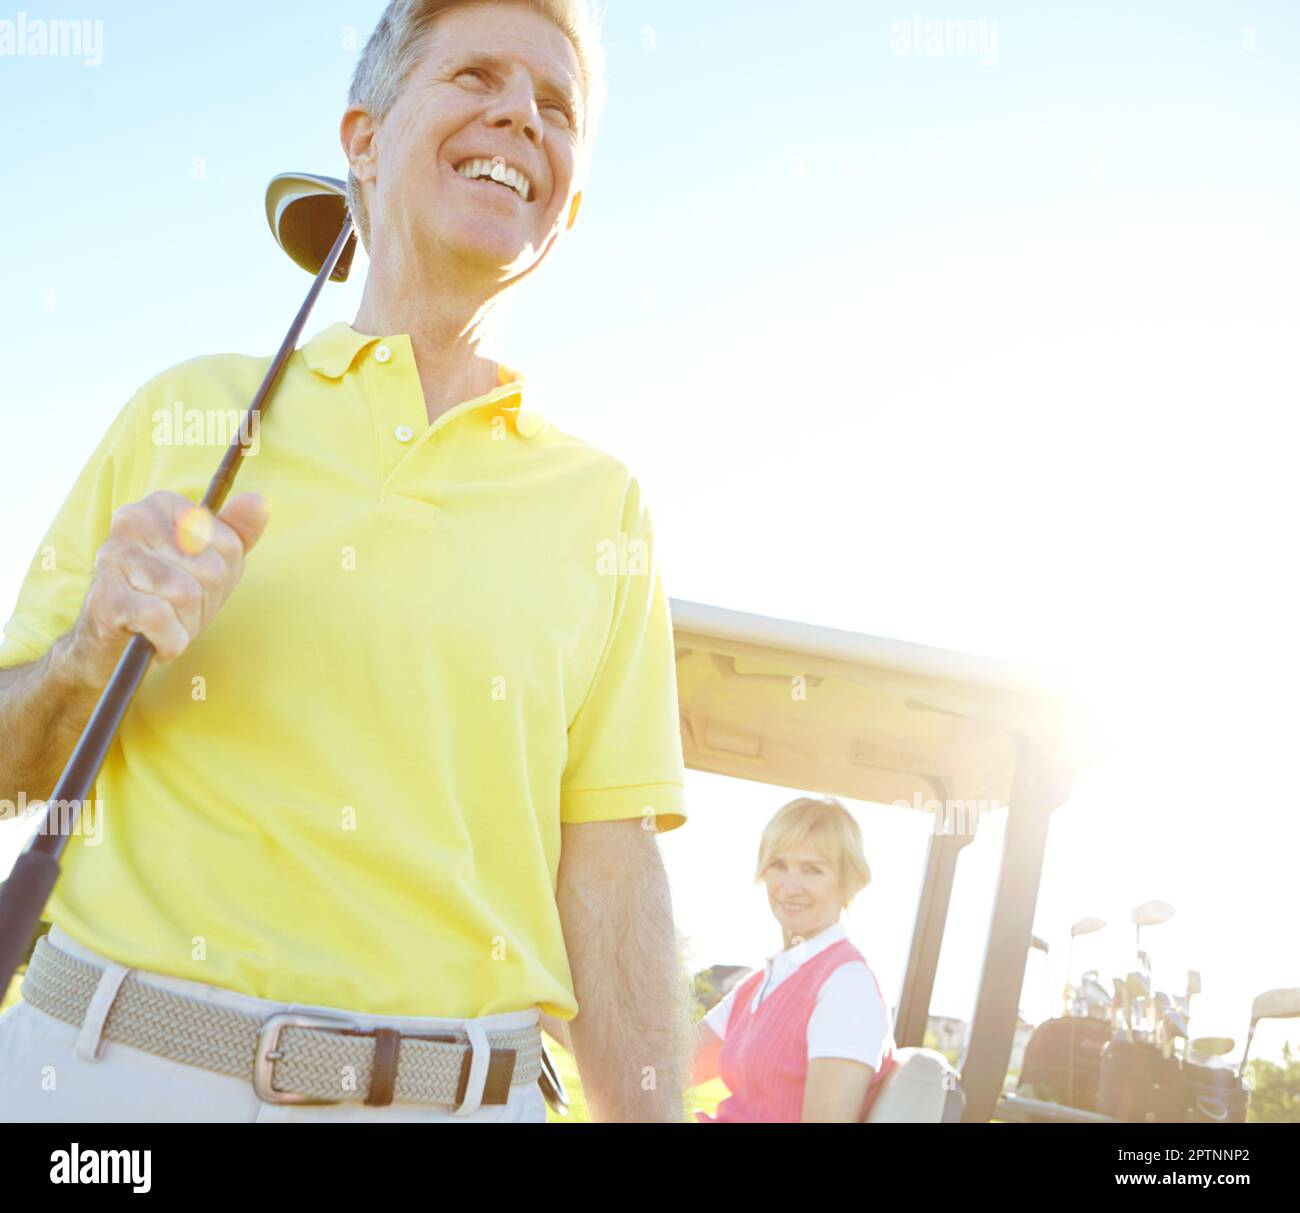 Lazy afternoon of golf. Low angle shot of a handsome older golfer standing in front of a golf cart with his golfing buddy behind the wheel. Stock Photo